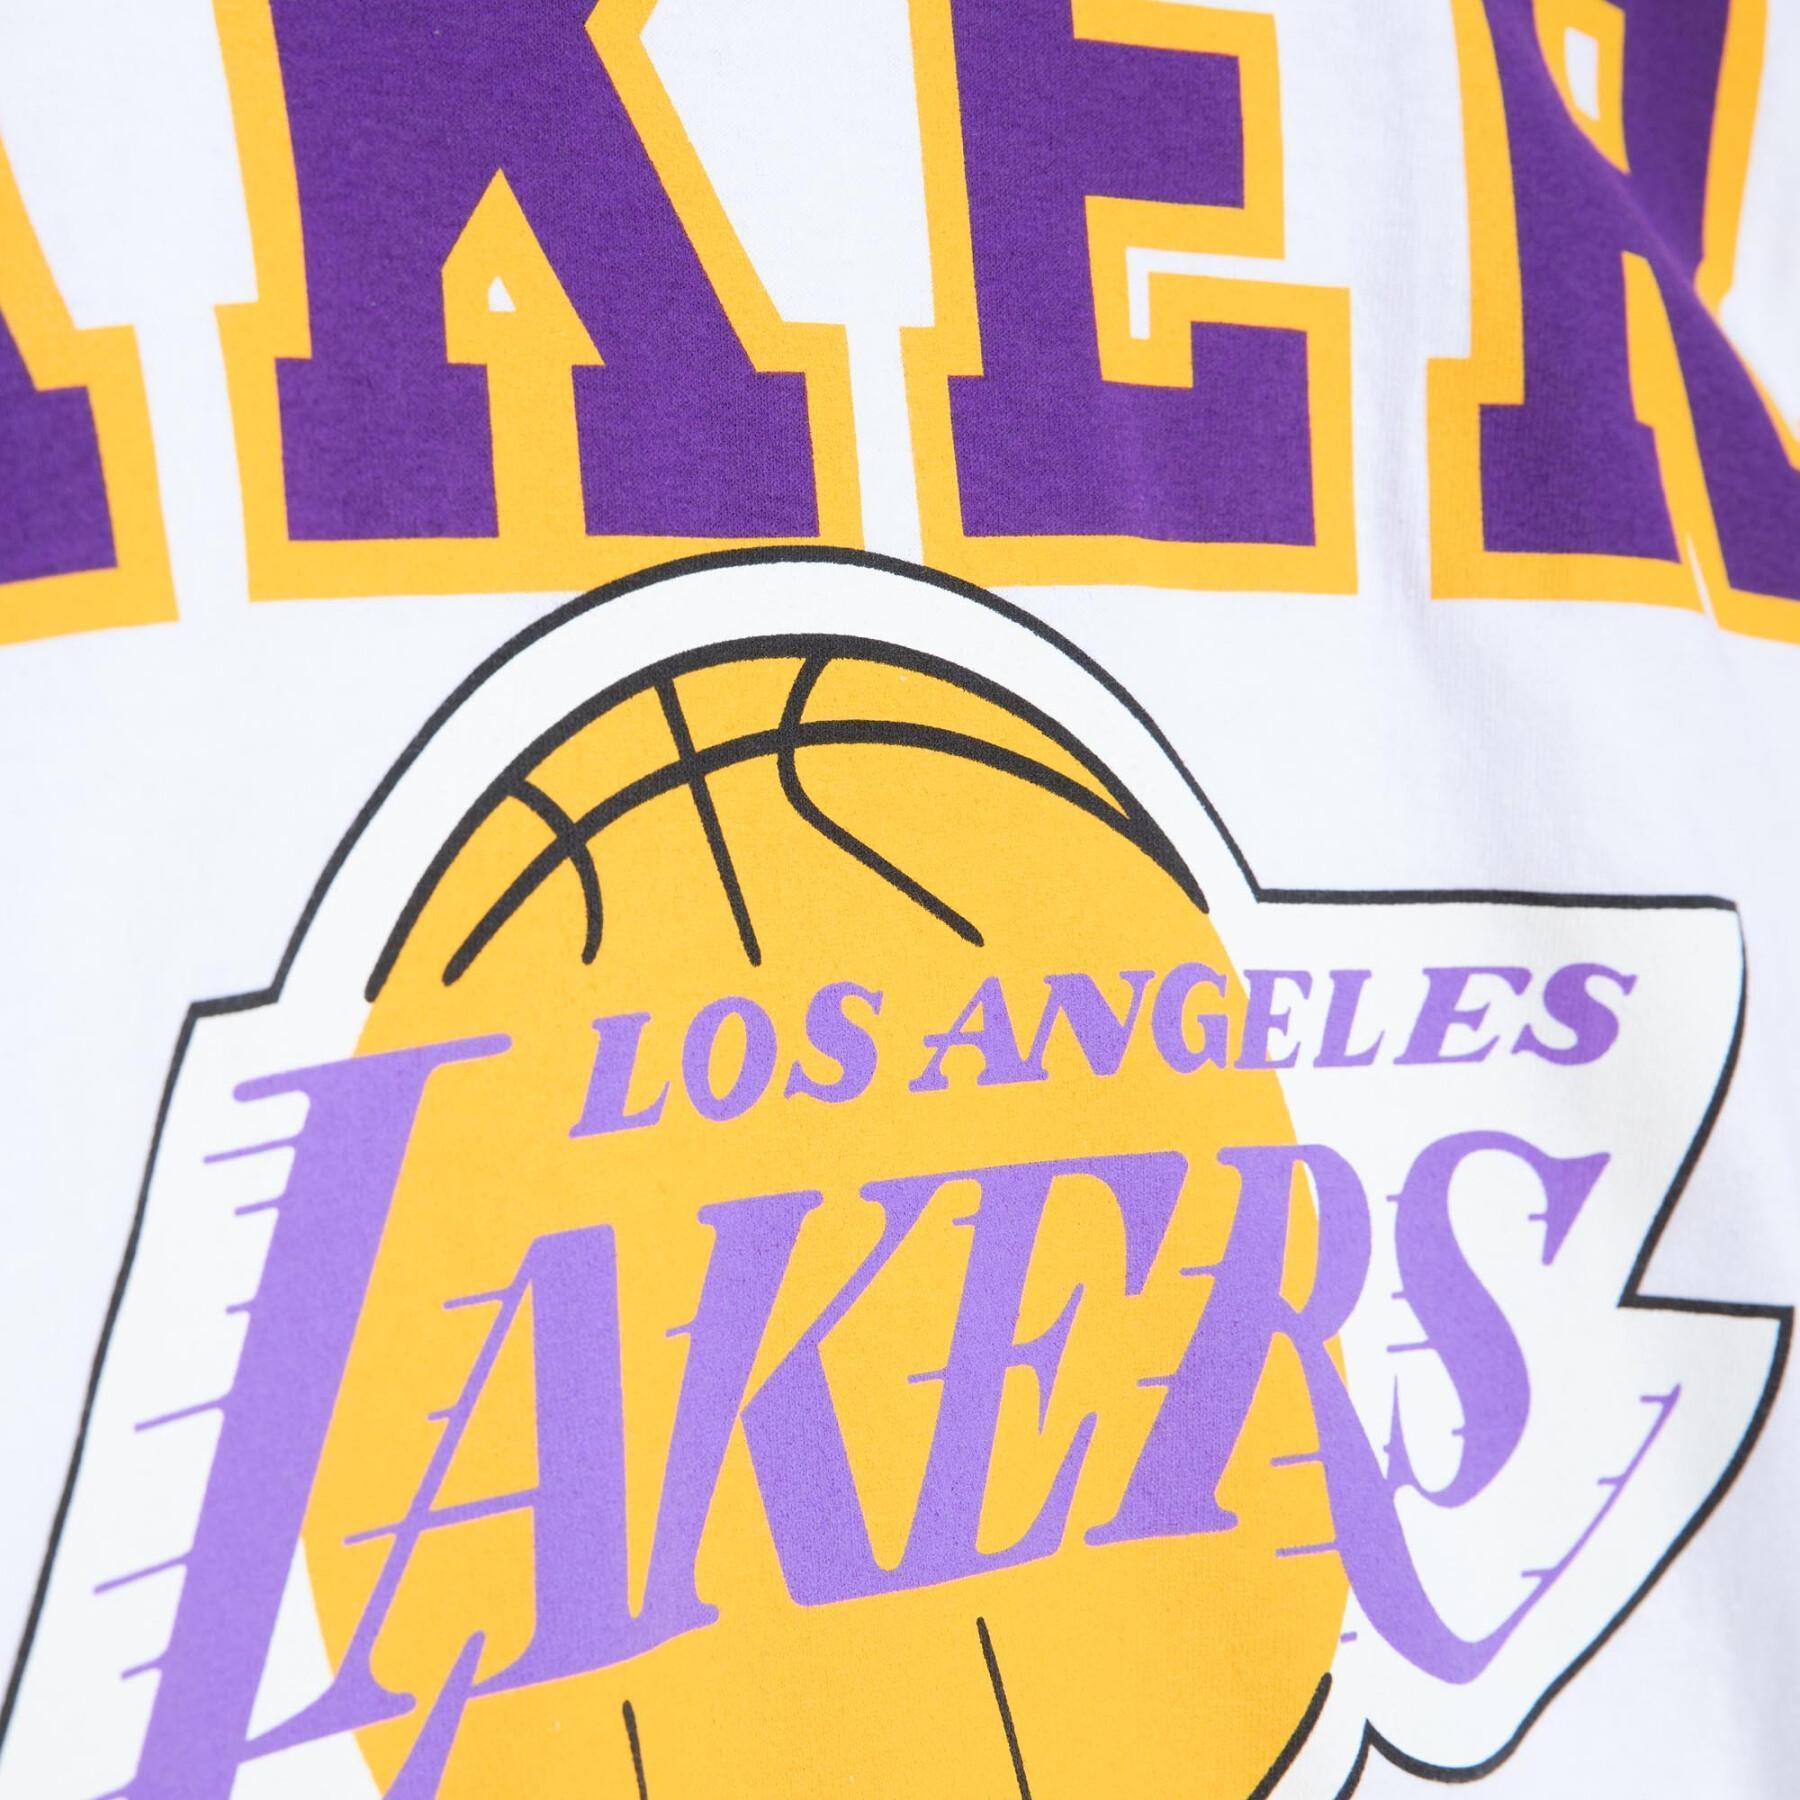 T-shirt donna a girocollo Los Angeles Lakers Blank